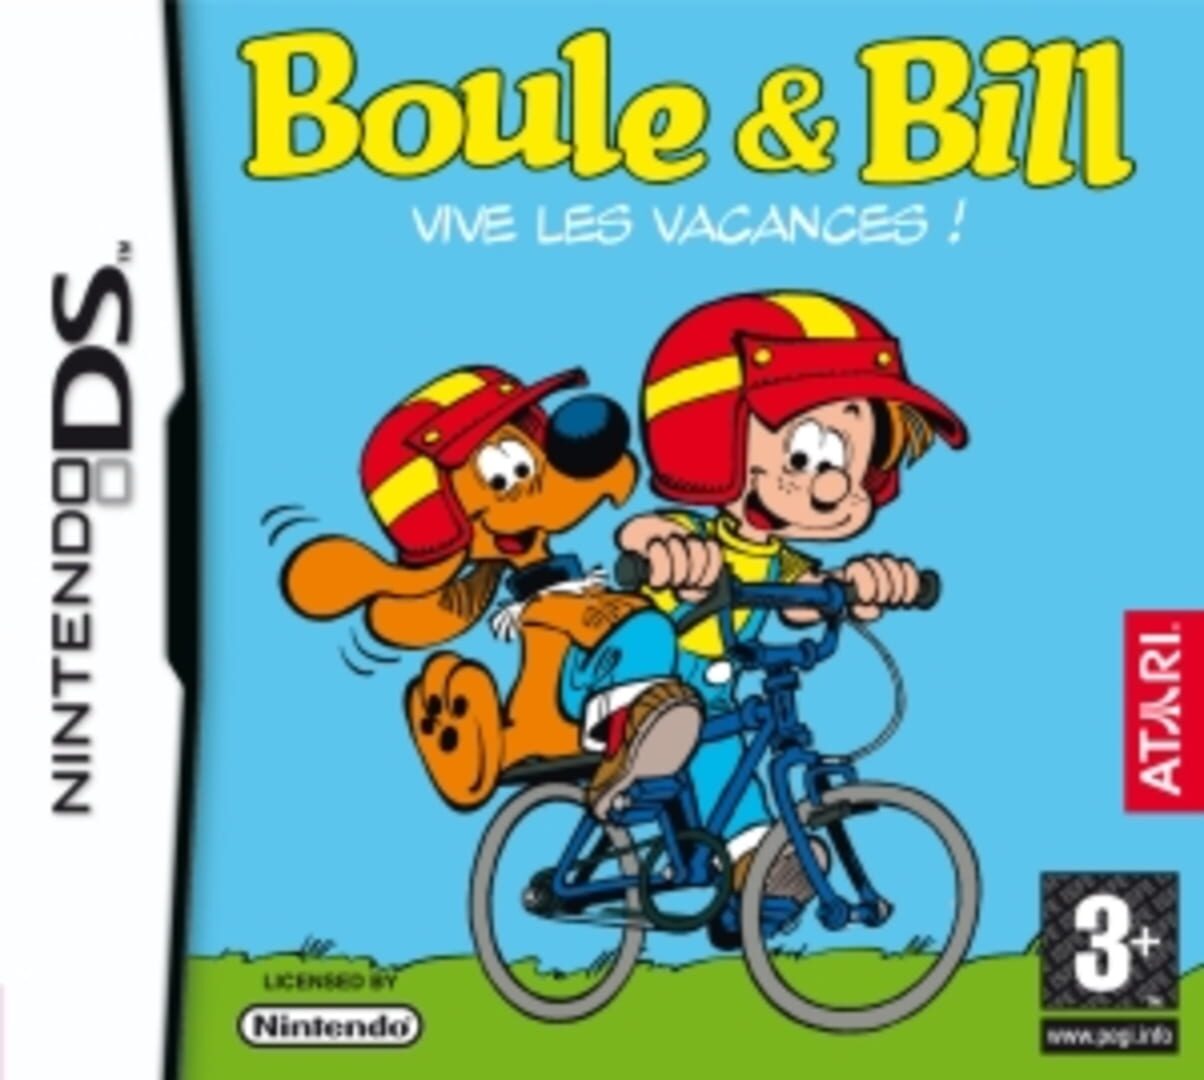 BOULE & BILL: Holiday time!